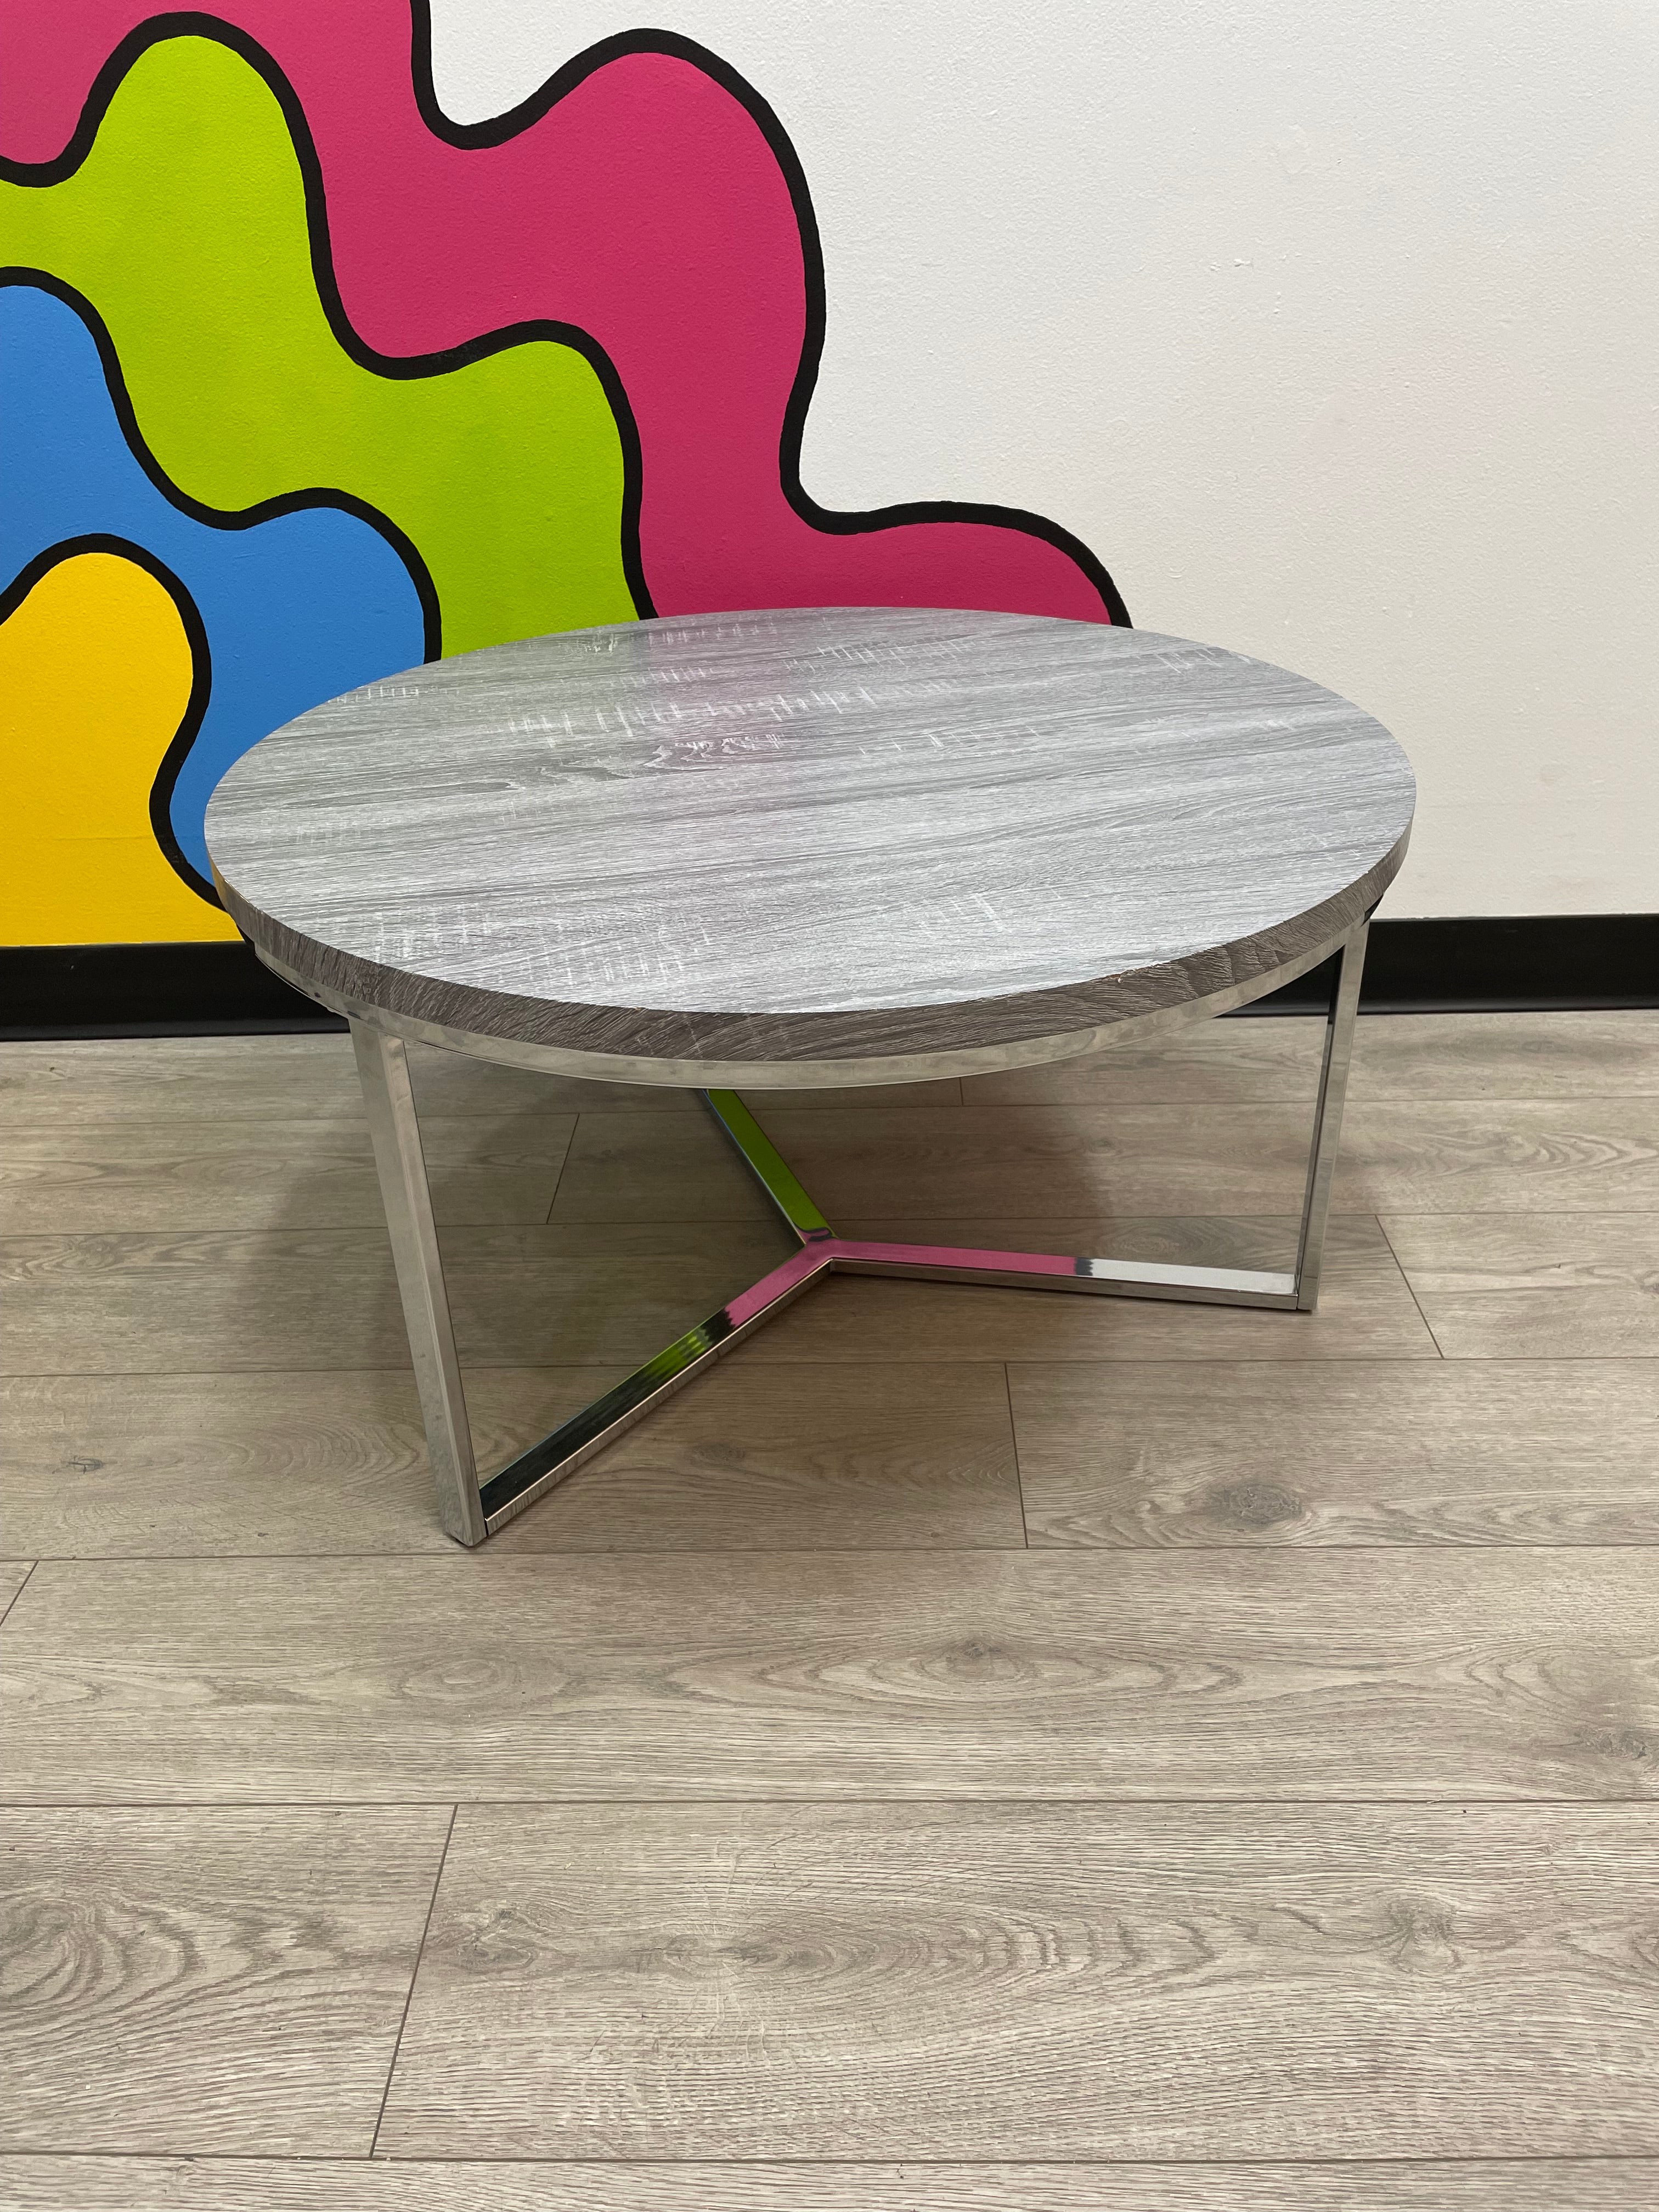 Round Grey Coffee Table